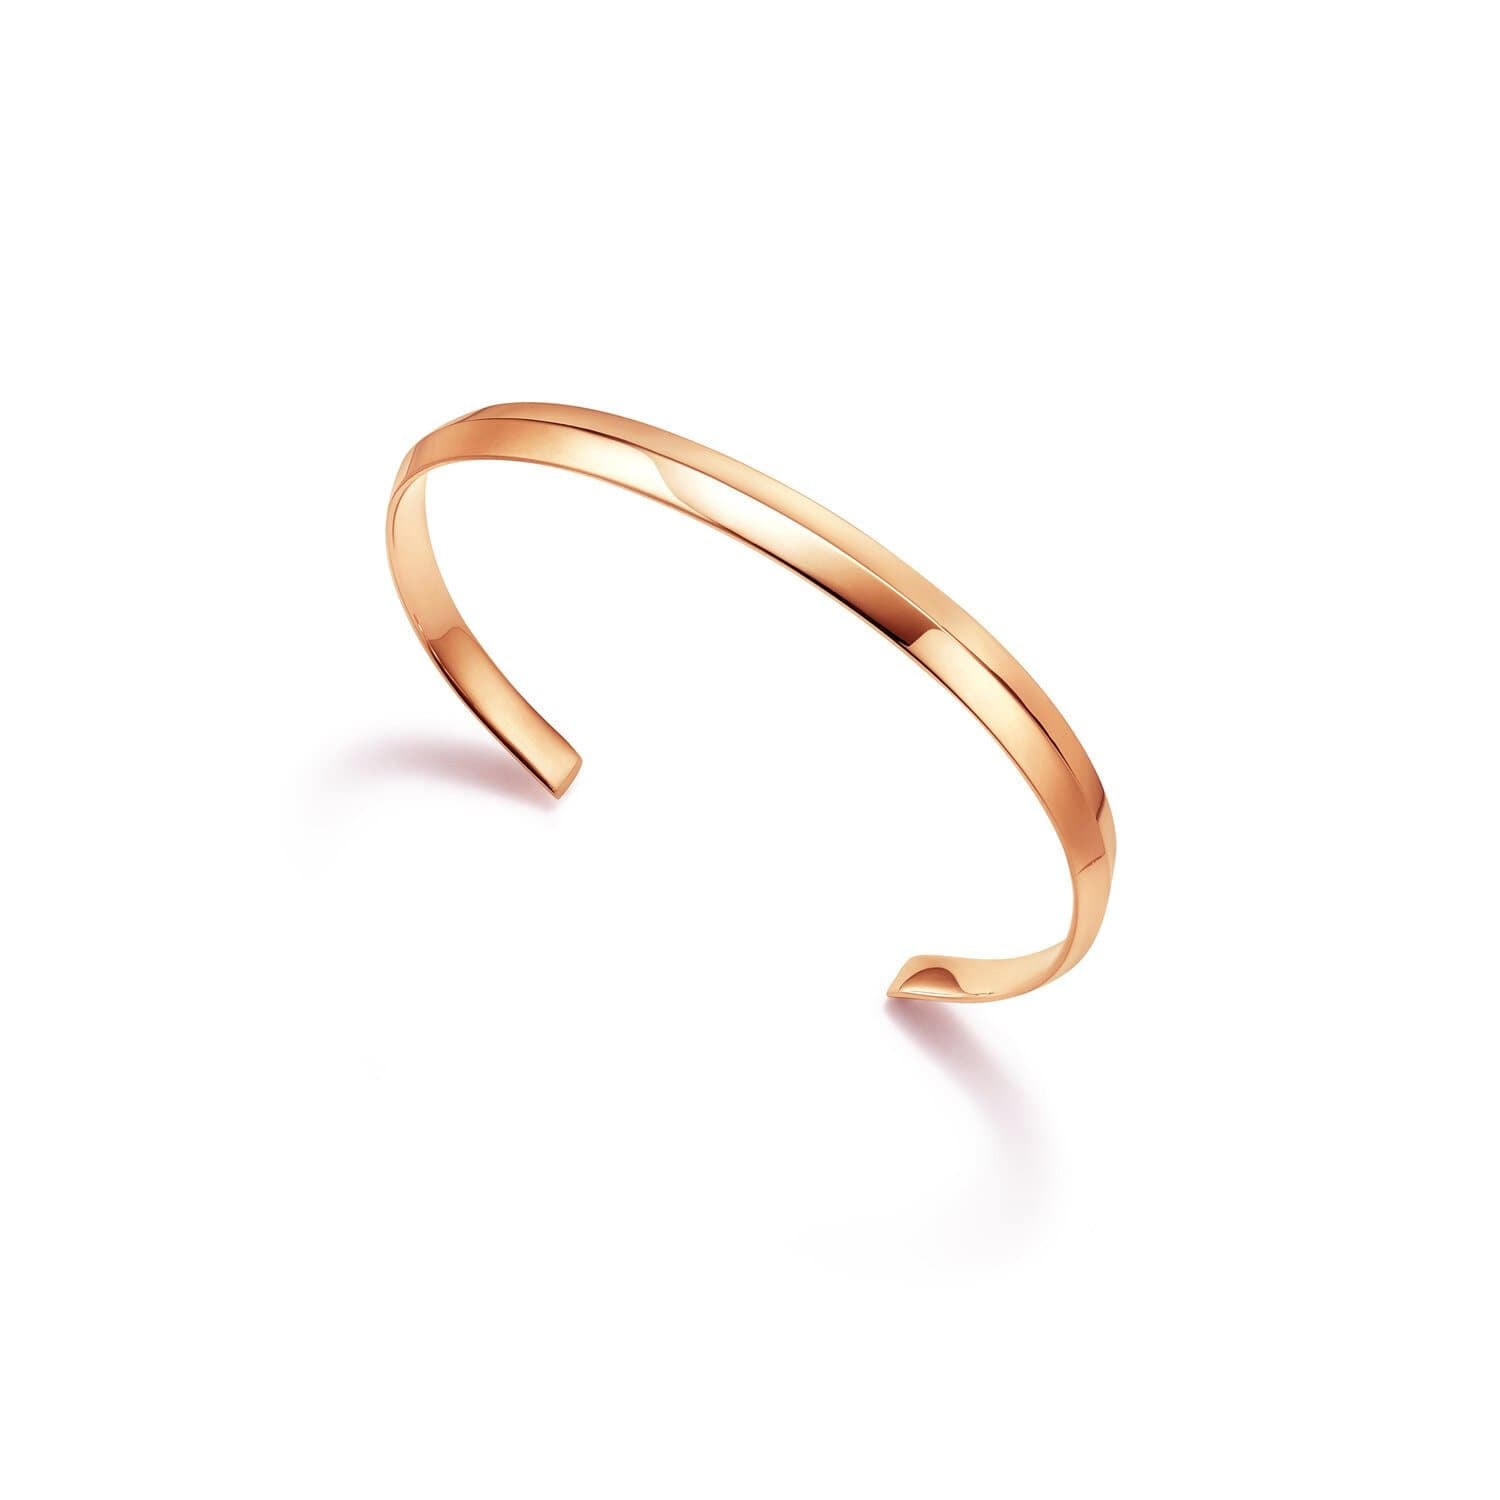 Rose Gold Cuff Bracelet - Crafted in NYC with Sustainable Gold